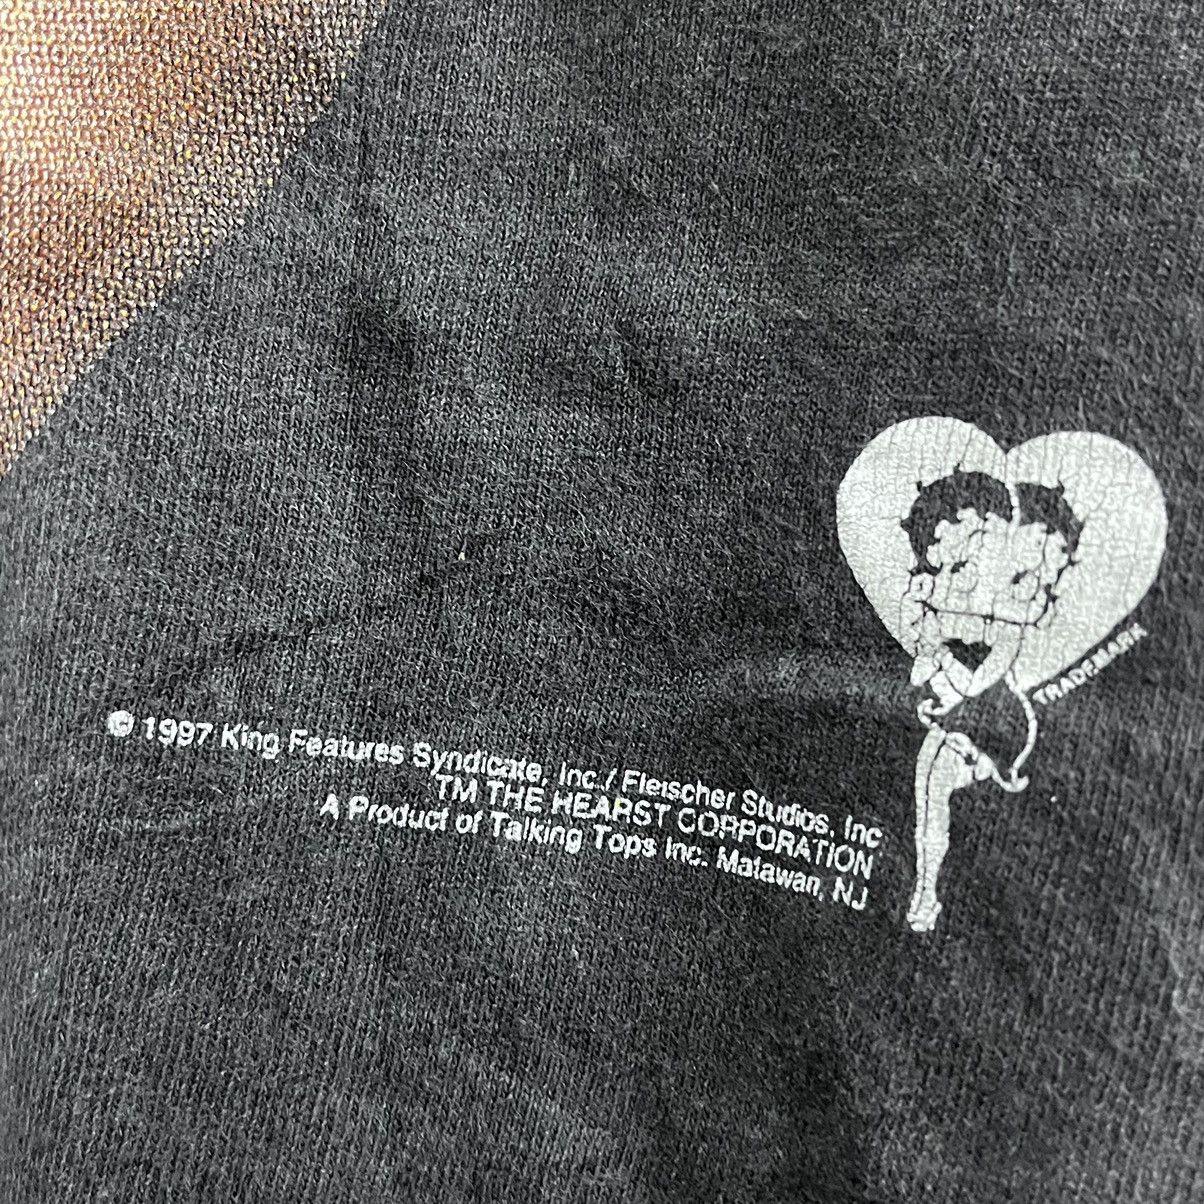 Vintage 1997 Betty Boop King Features TShirt USA - 9